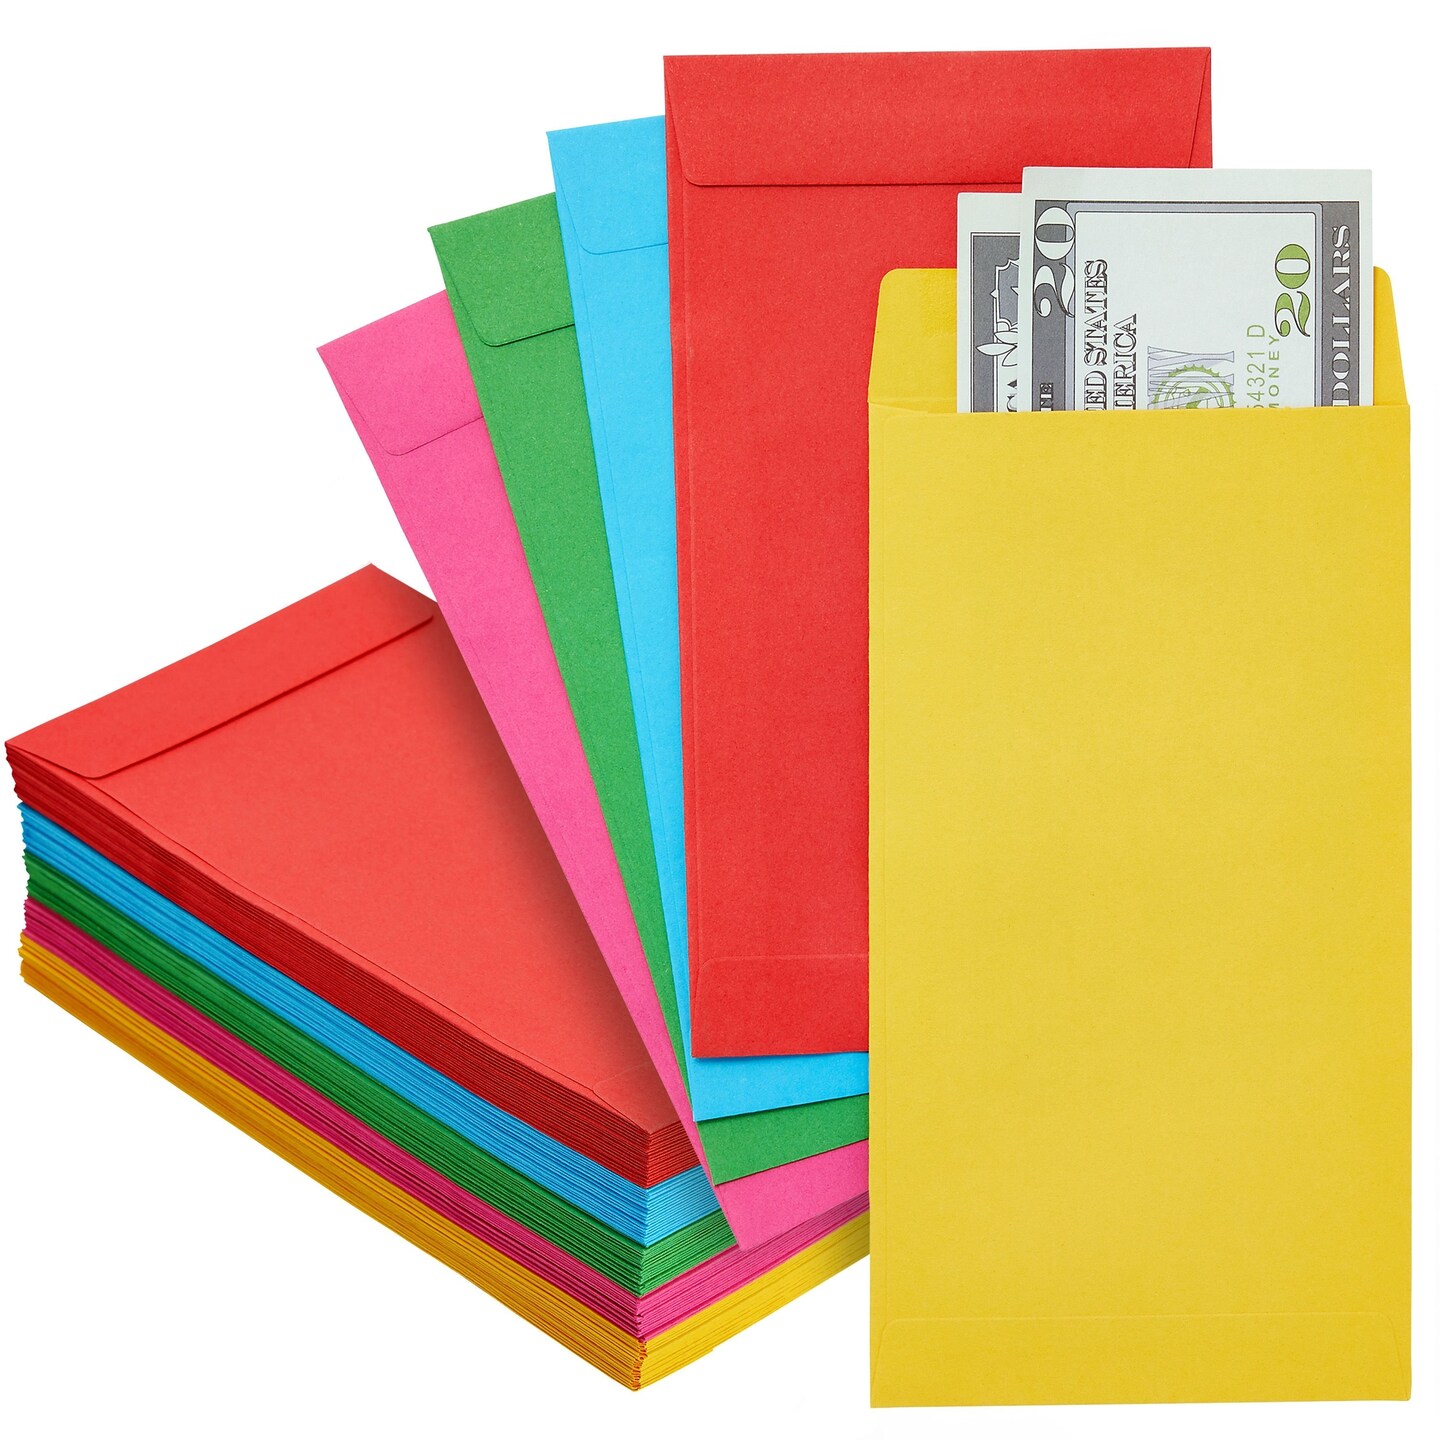 Jam Paper Plastic 3 Hole Punch Binder Envelopes with Zip Closure - #10 Size (6 x 9 1/2) - Clear - 12/Pack